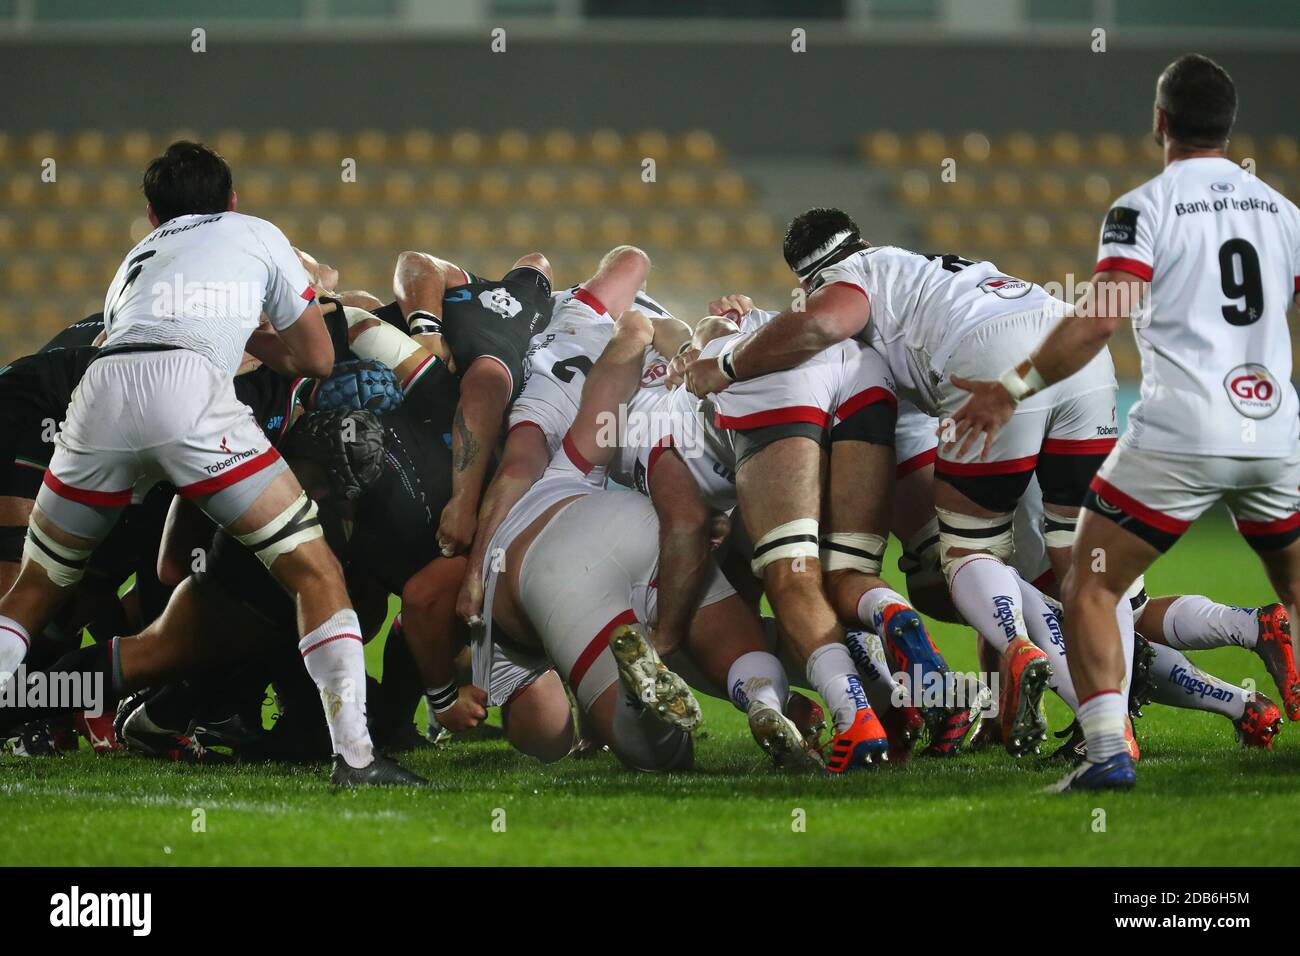 Sergio Lanfranchi stadium, Parma, Italy, 16 Nov 2020, The scrum collapses during Zebre Rugby vs Ulster Rugby, Rugby Guinness Pro 14 match - Photo Massimiliano Carnabuci / LM Stock Photo